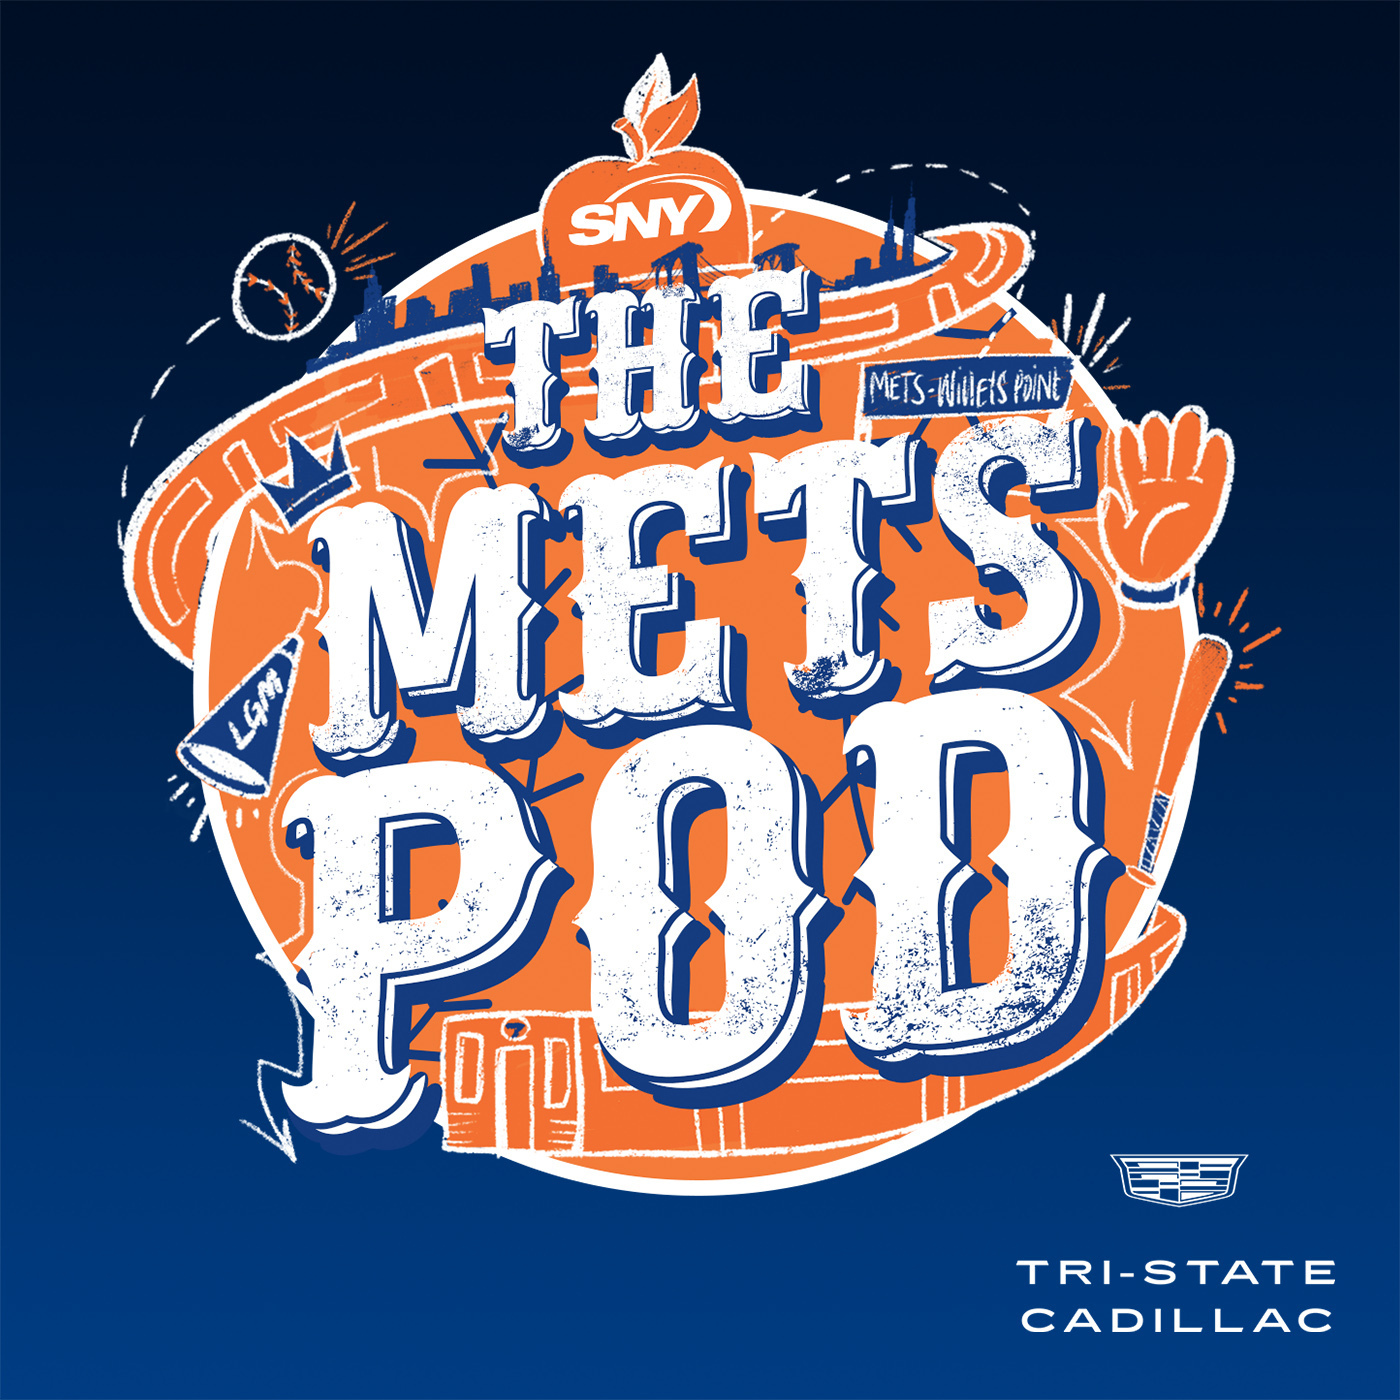 SNY New York Mets Broadcast Booth Documentary Premieres Tonight